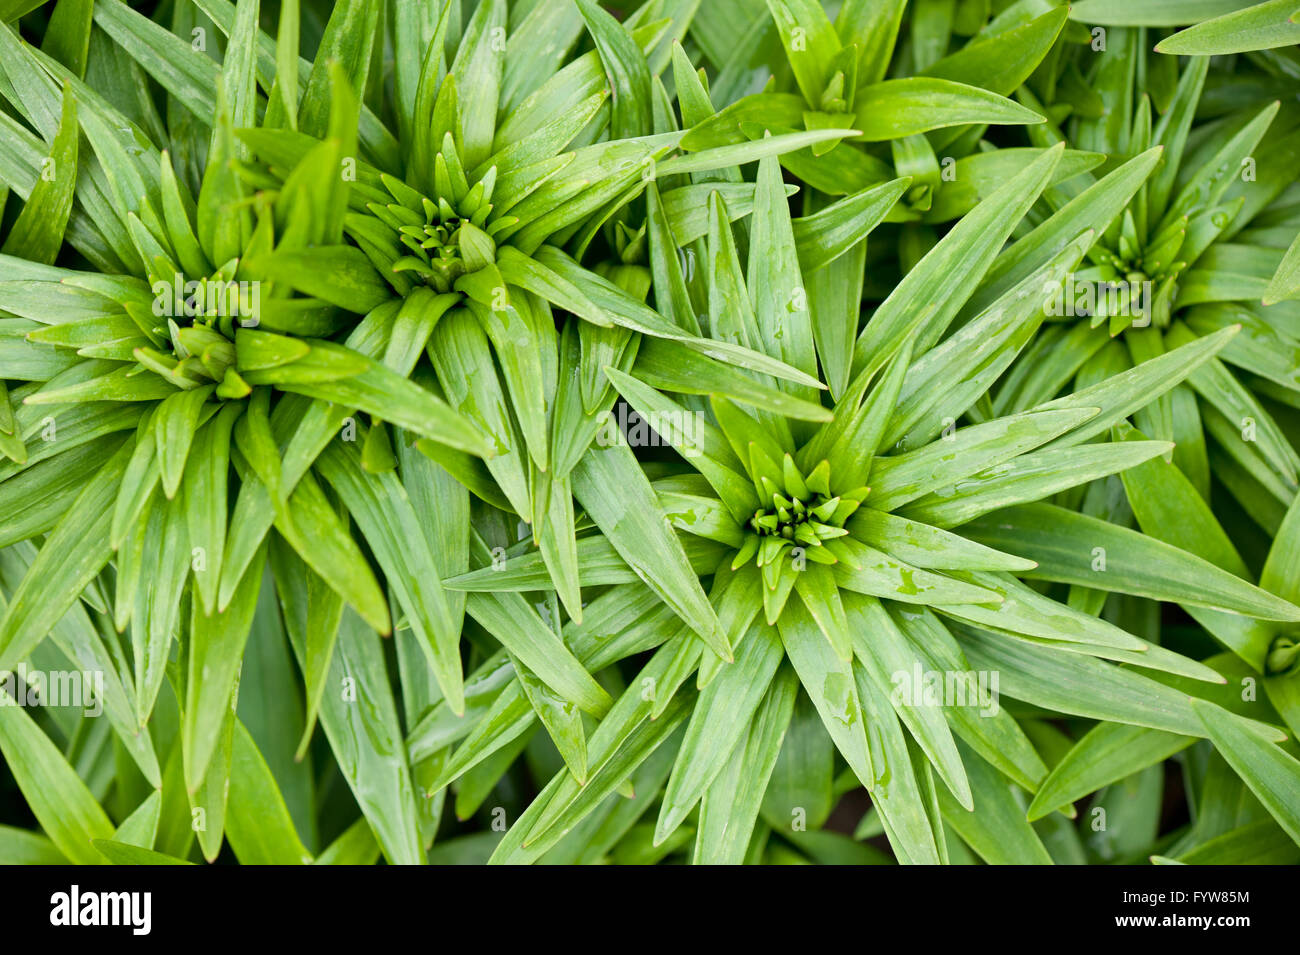 Sprouting Lilium leaves rosettes macro, wet Lily plants green fresh foliage with raindrops grow in spring in Poland, Europe. Stock Photo